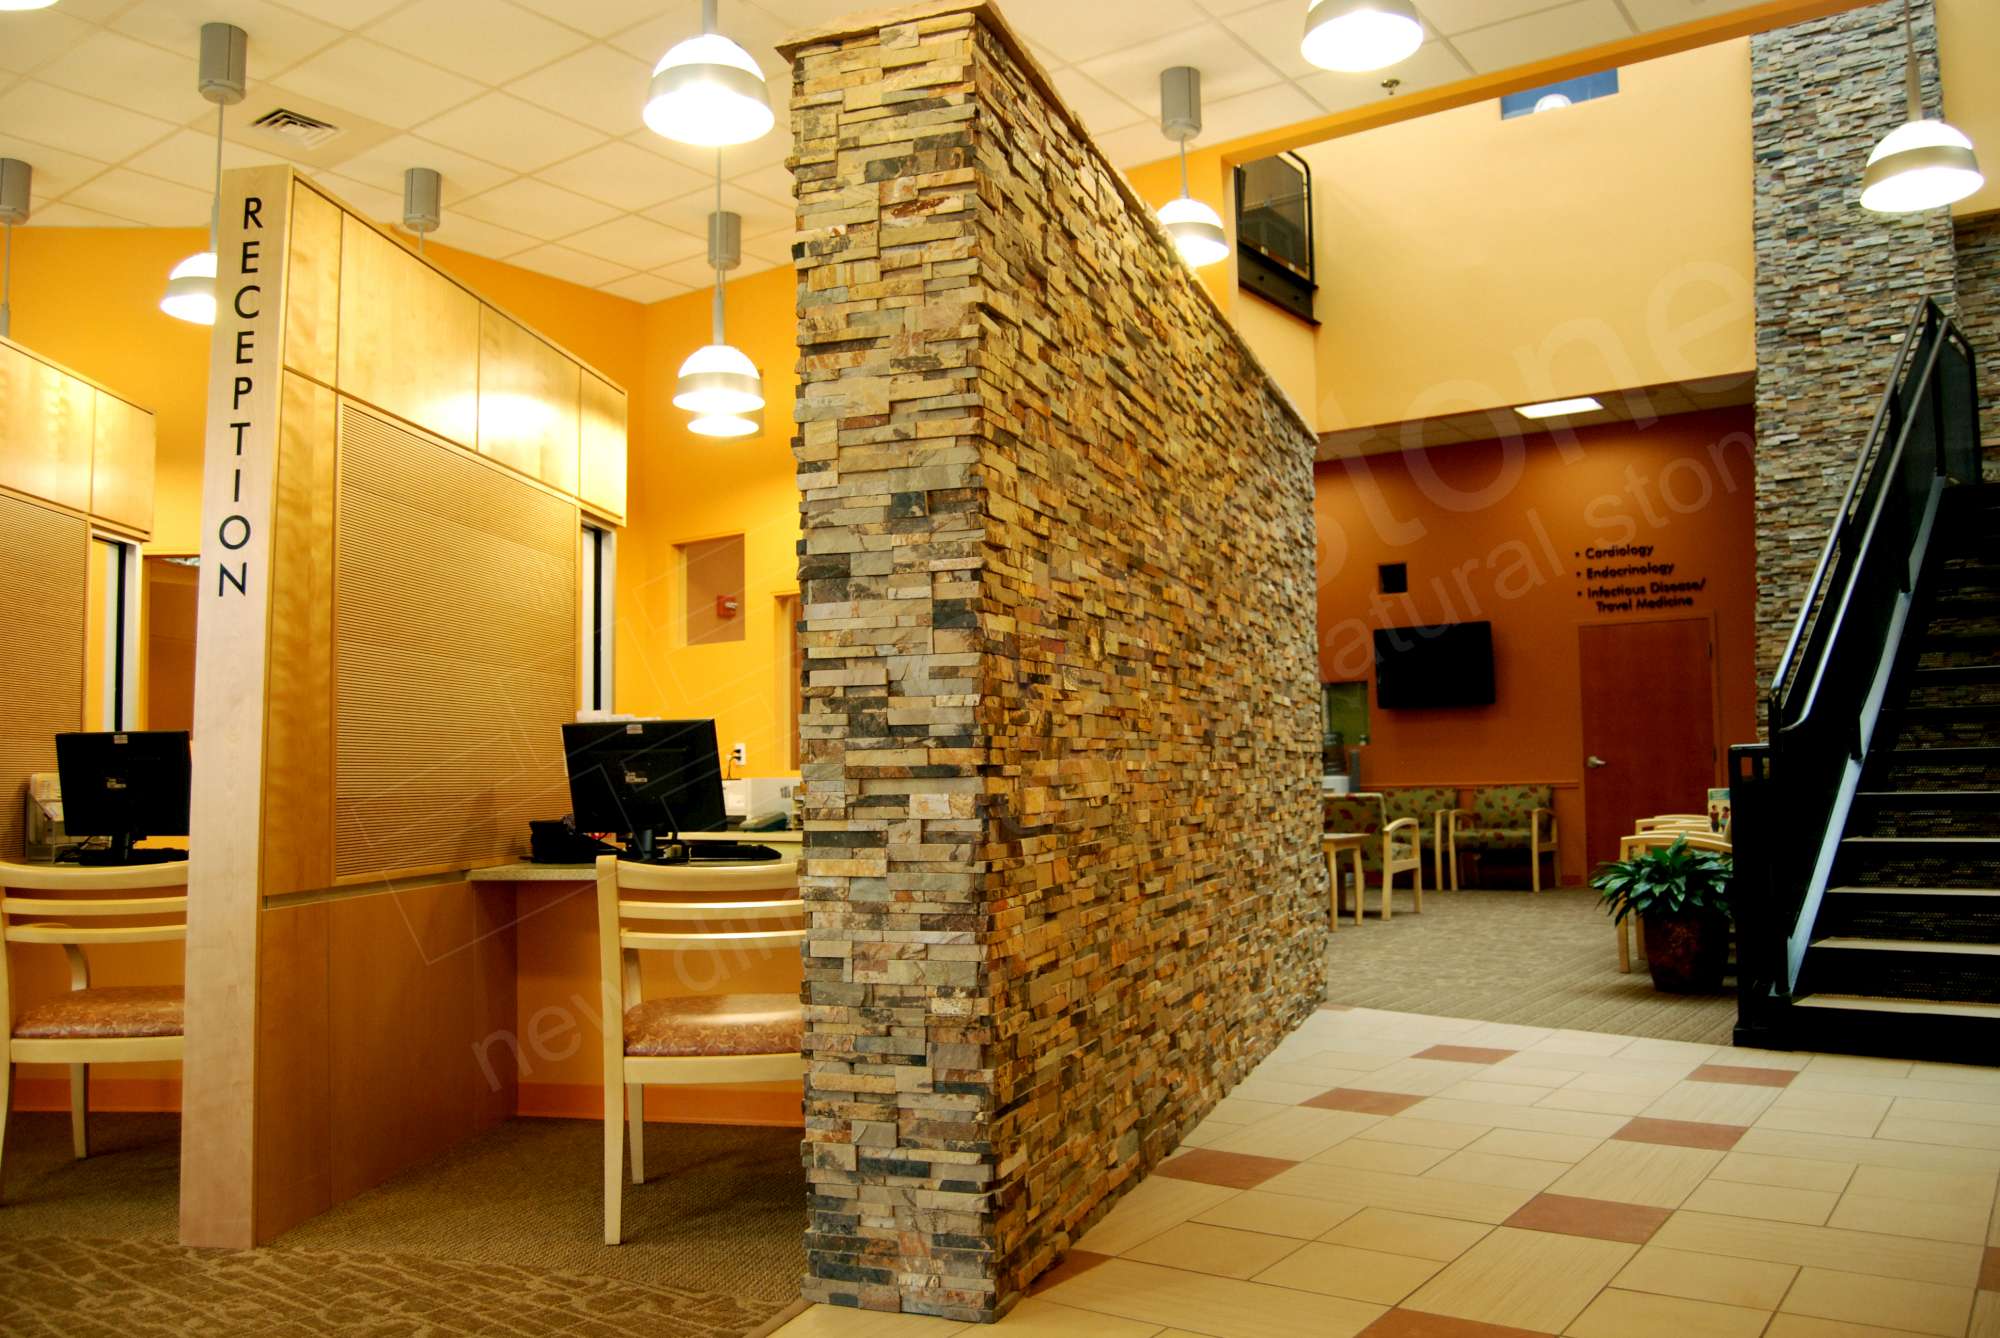 Norstone Ochre Stacked Stone Veneer Rock Panels used for dividing wall in medical office and waiting area